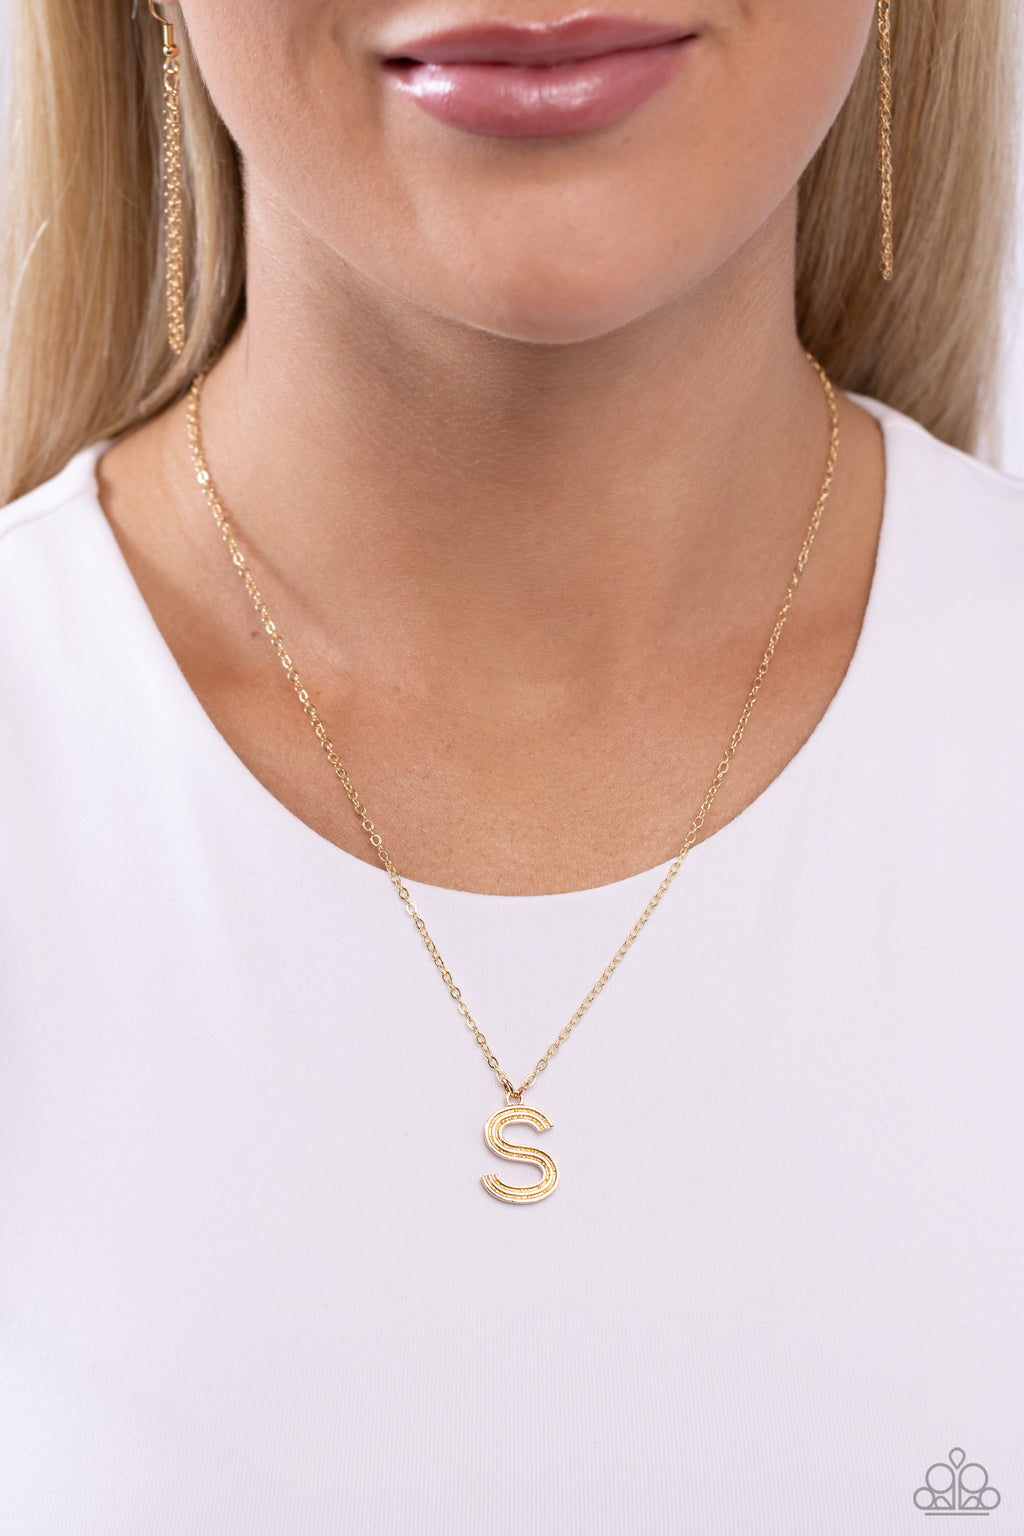 Paparazzi - Leave Your Initials - Gold - S Necklace